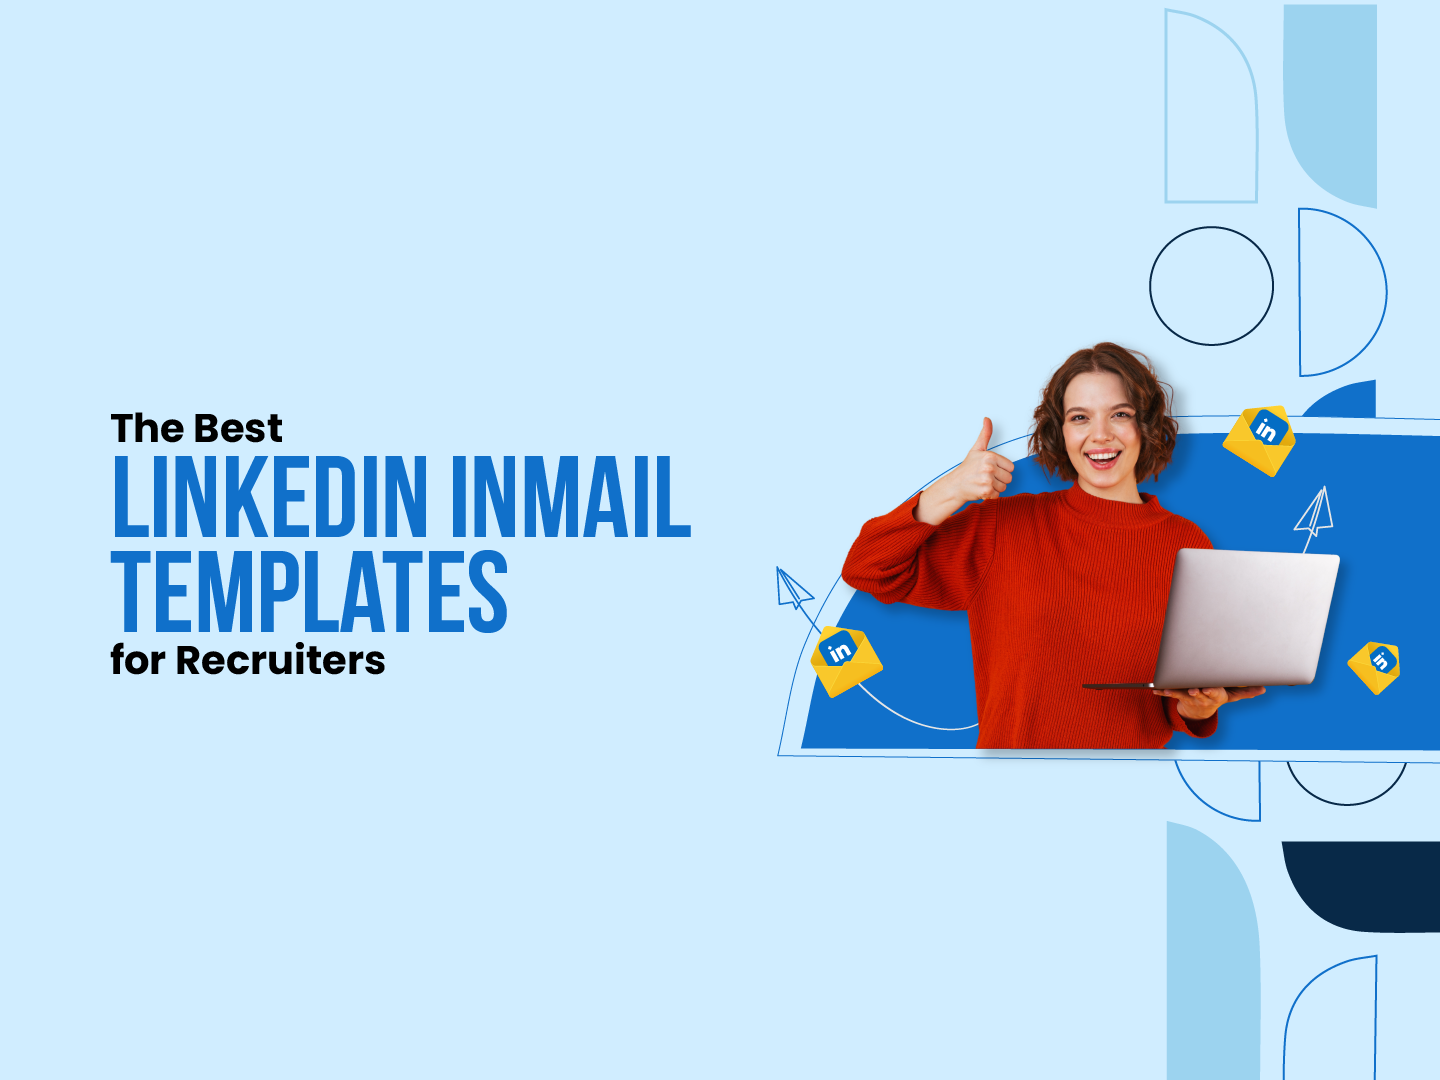 linkedin inmail templates for recruiters